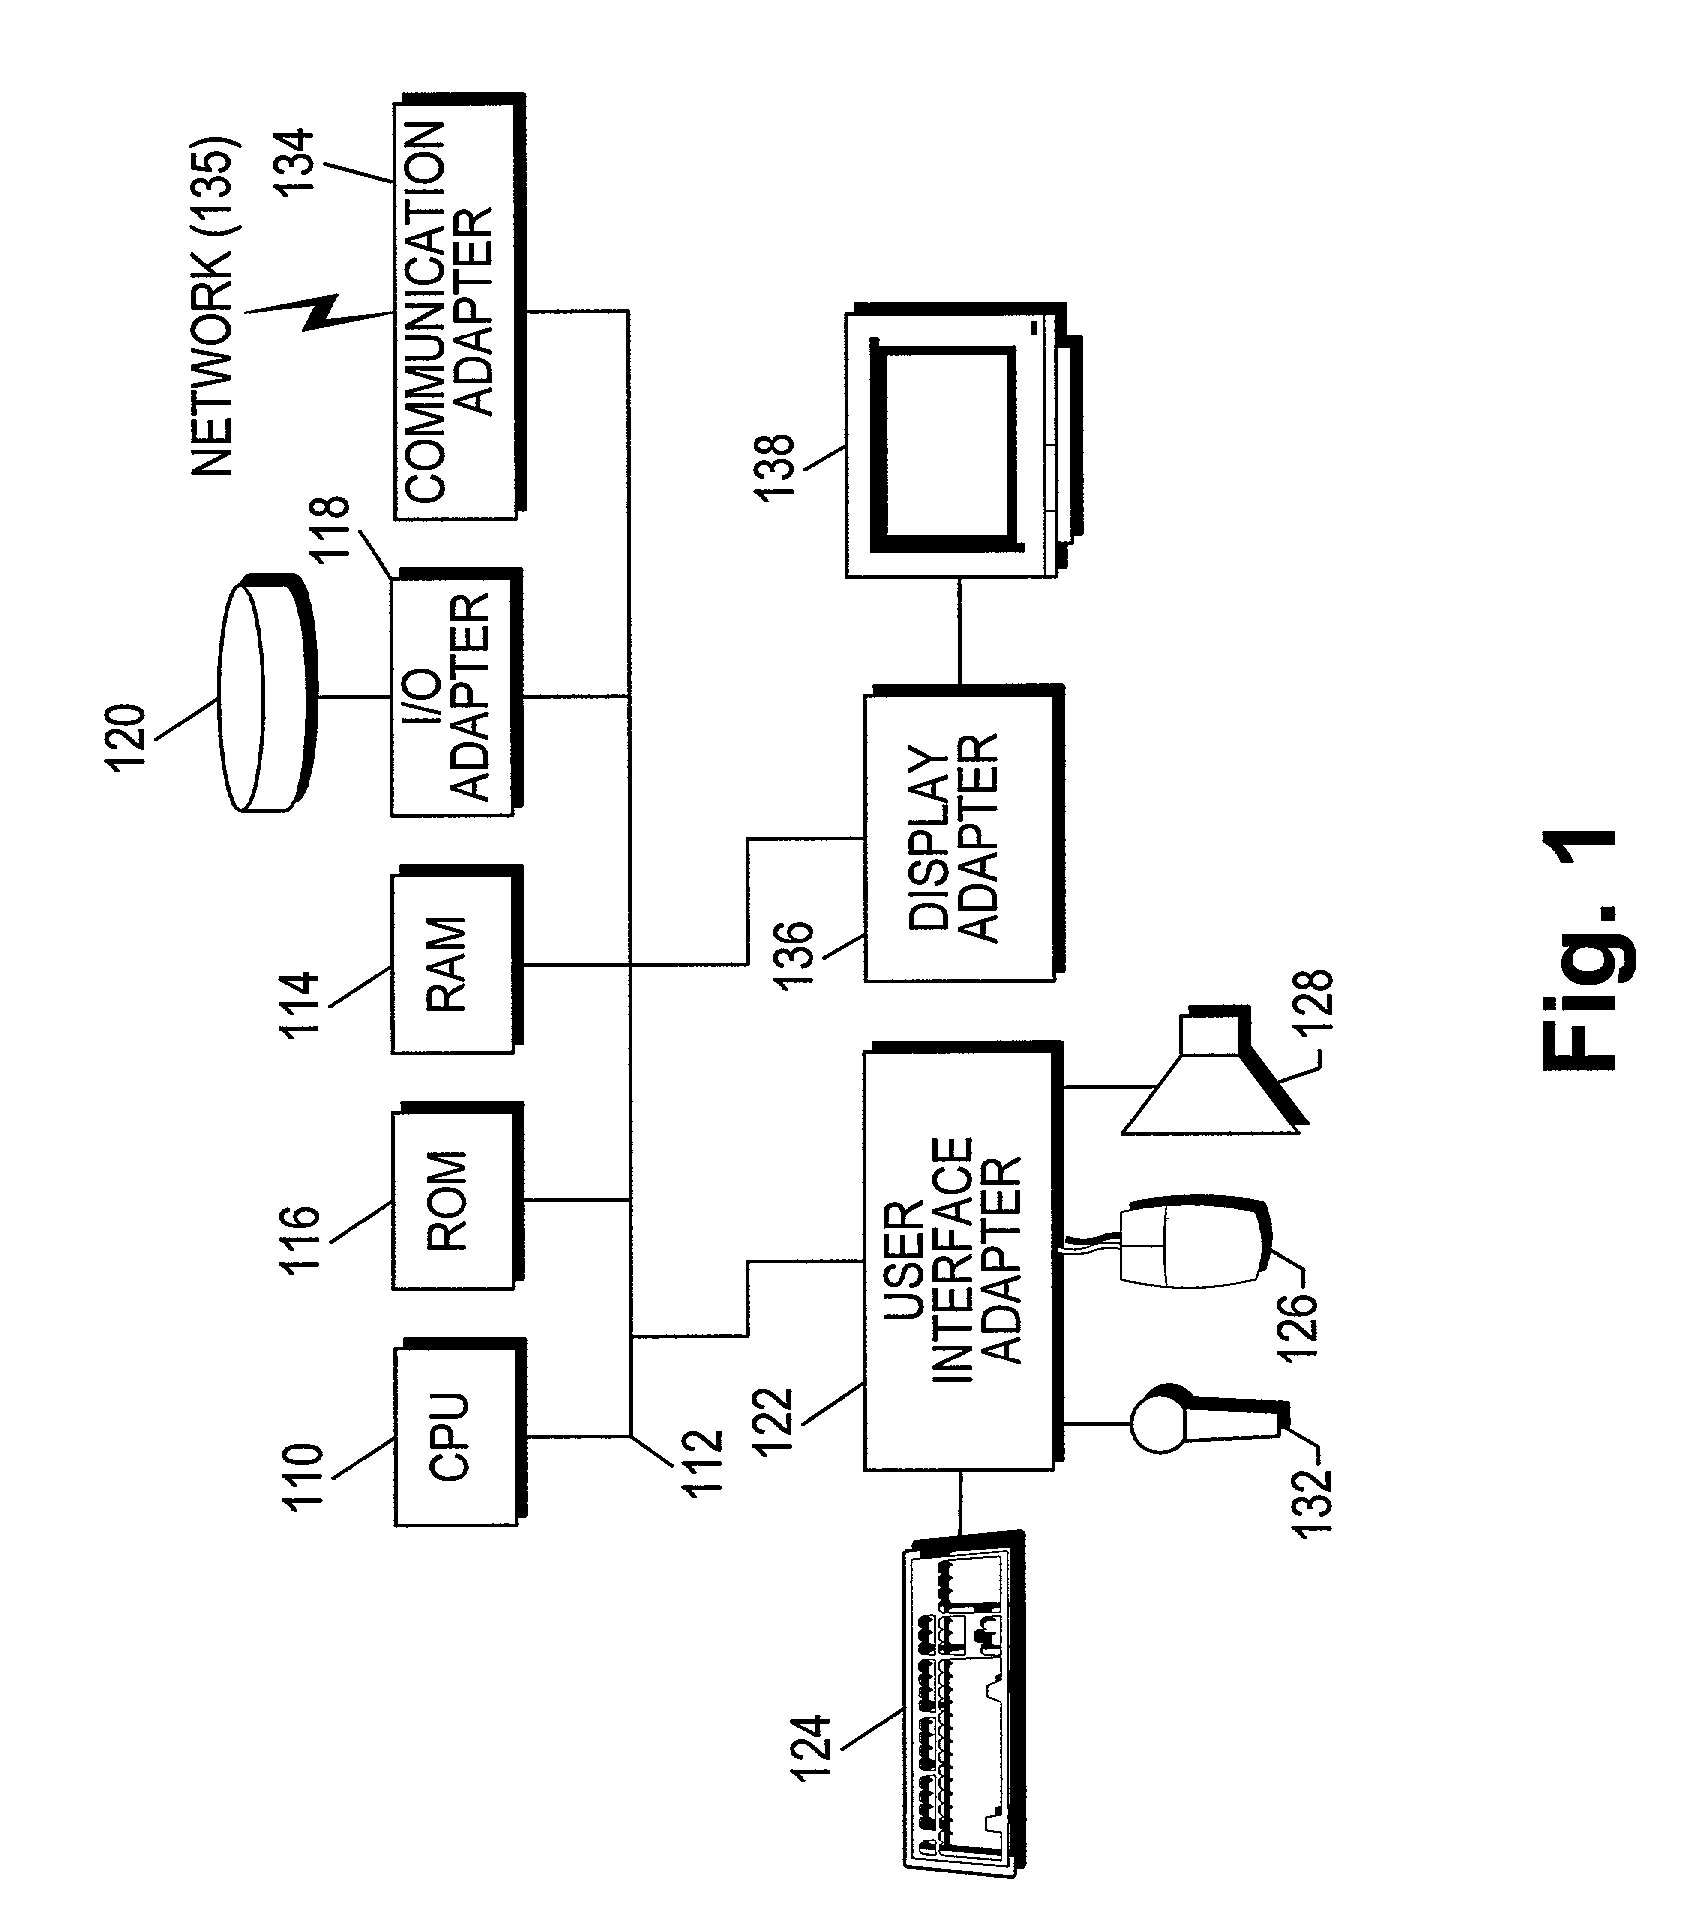 Interface for mobilizing content and transactions on multiple classes of devices